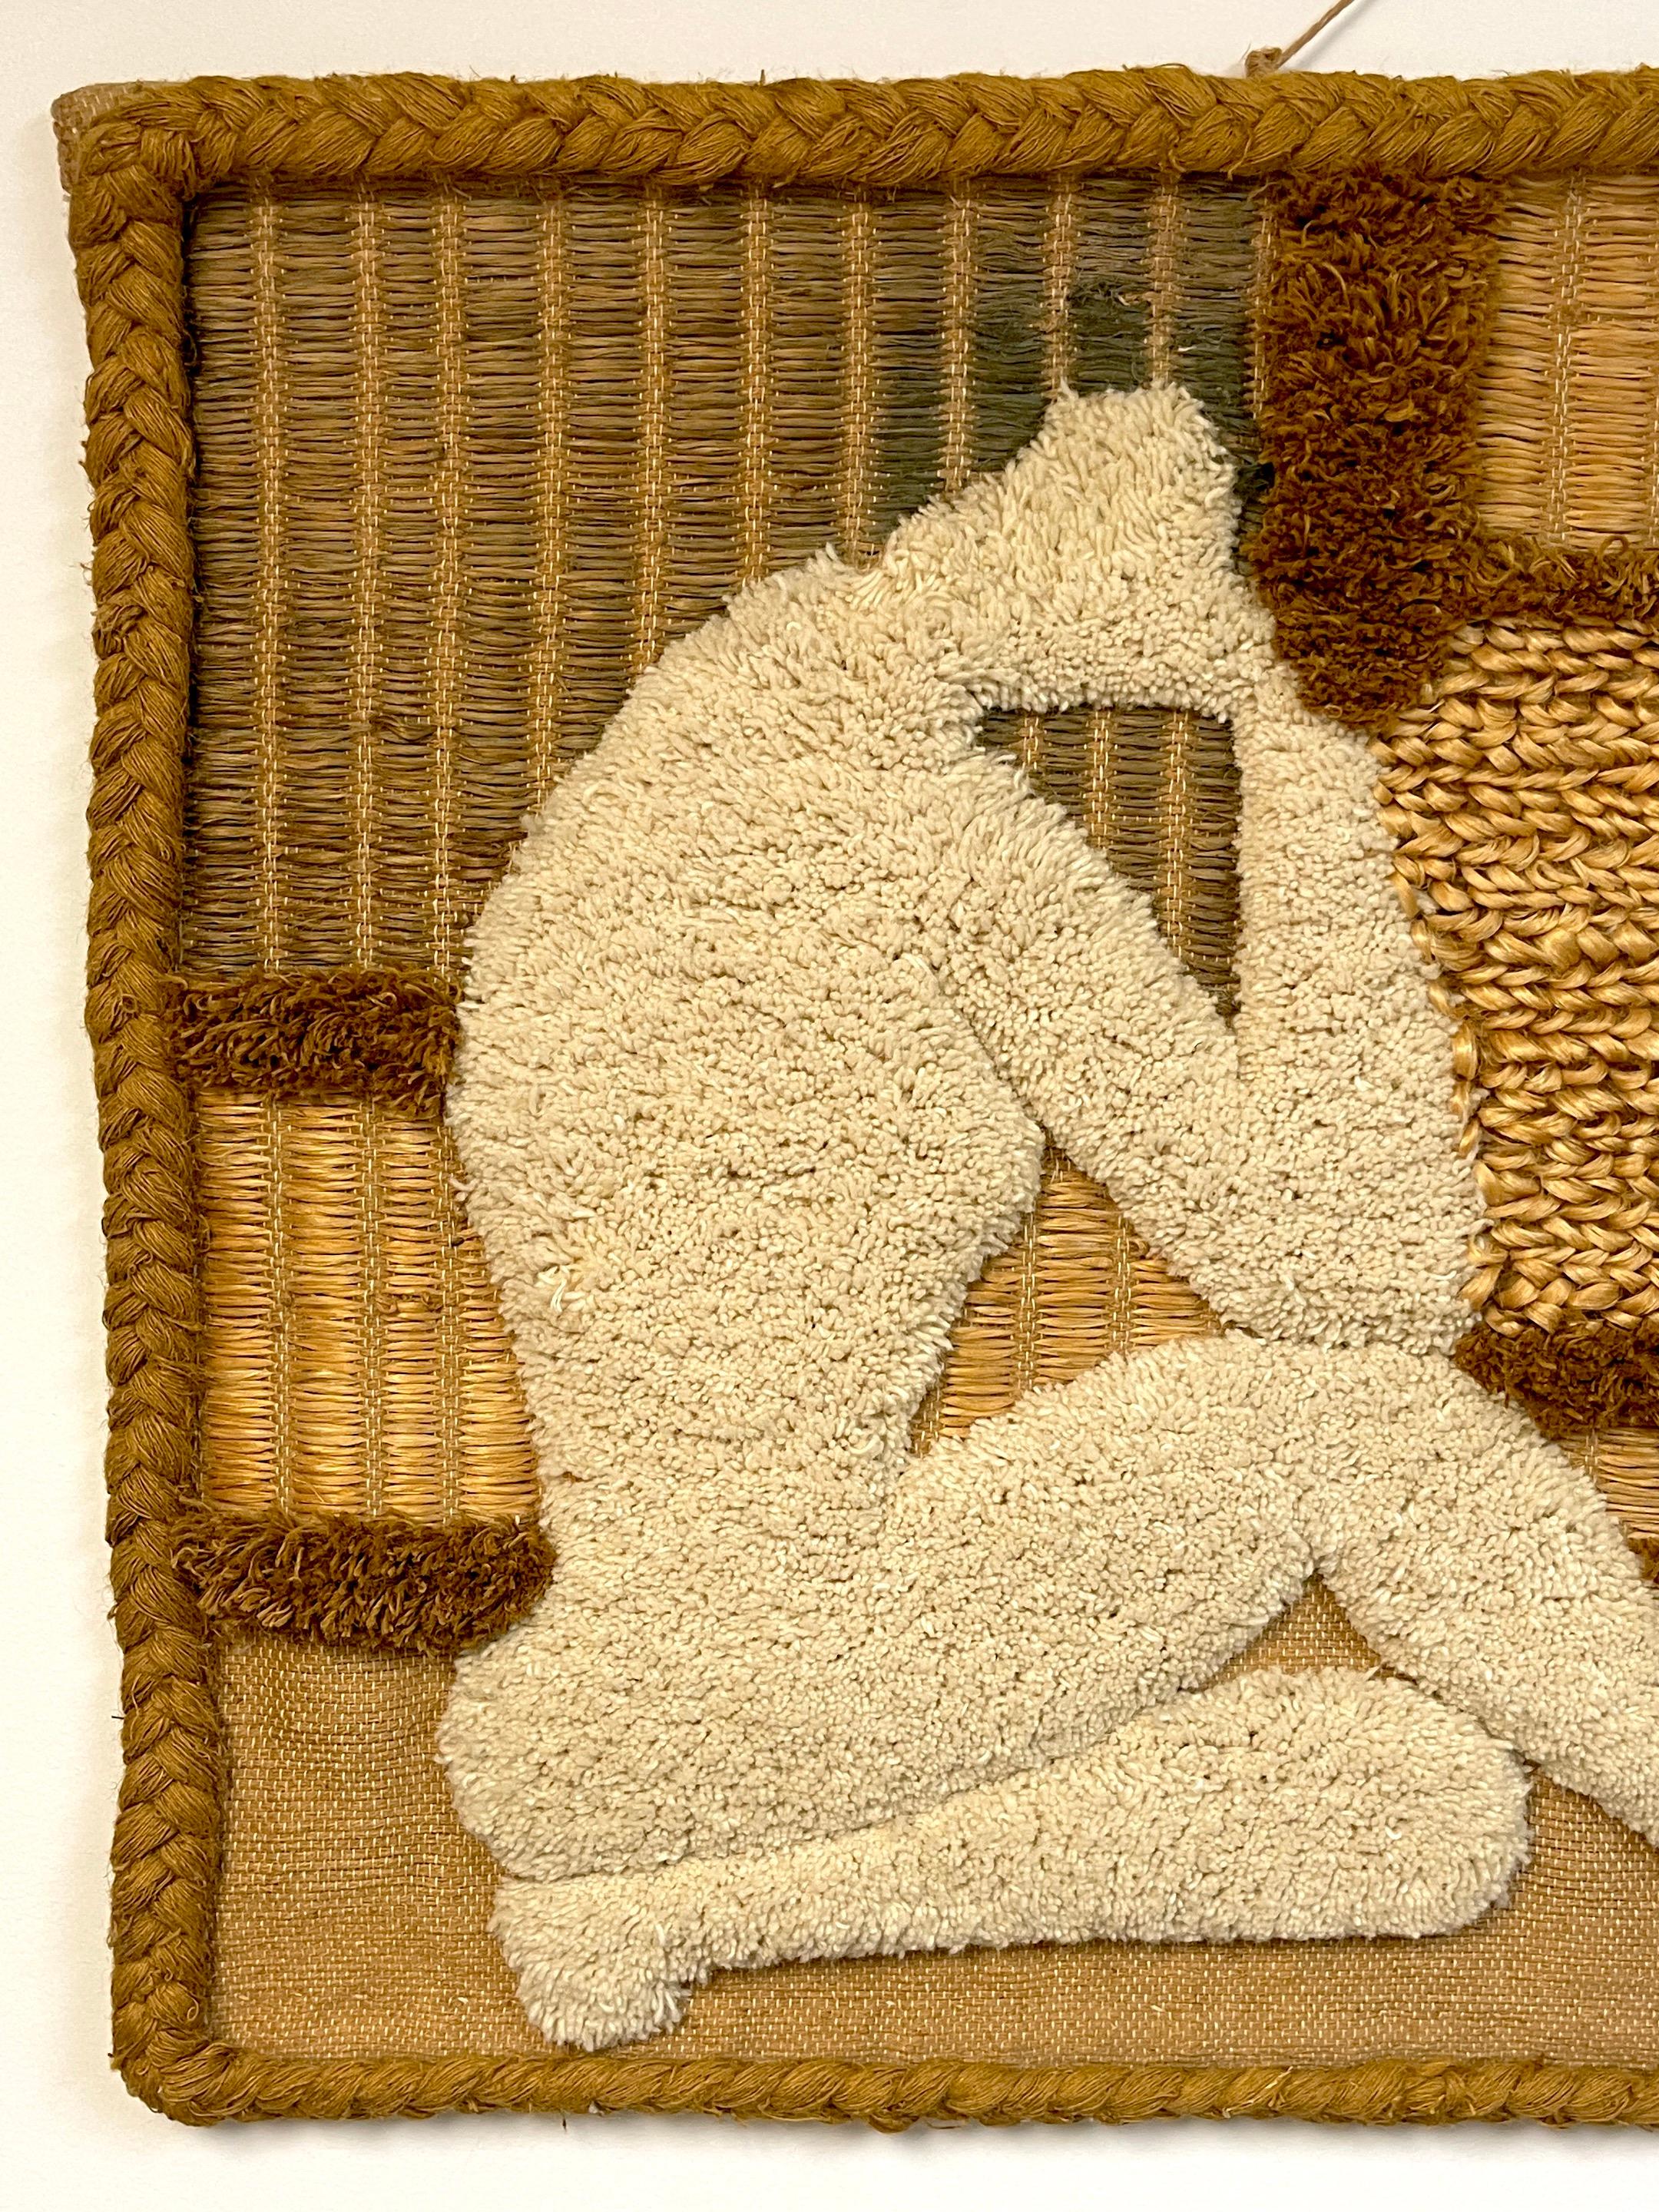 Mid-Century Modern Natural Fiber Art Wall Tapestry 'Seated Nude' by Don Freedman, 1978